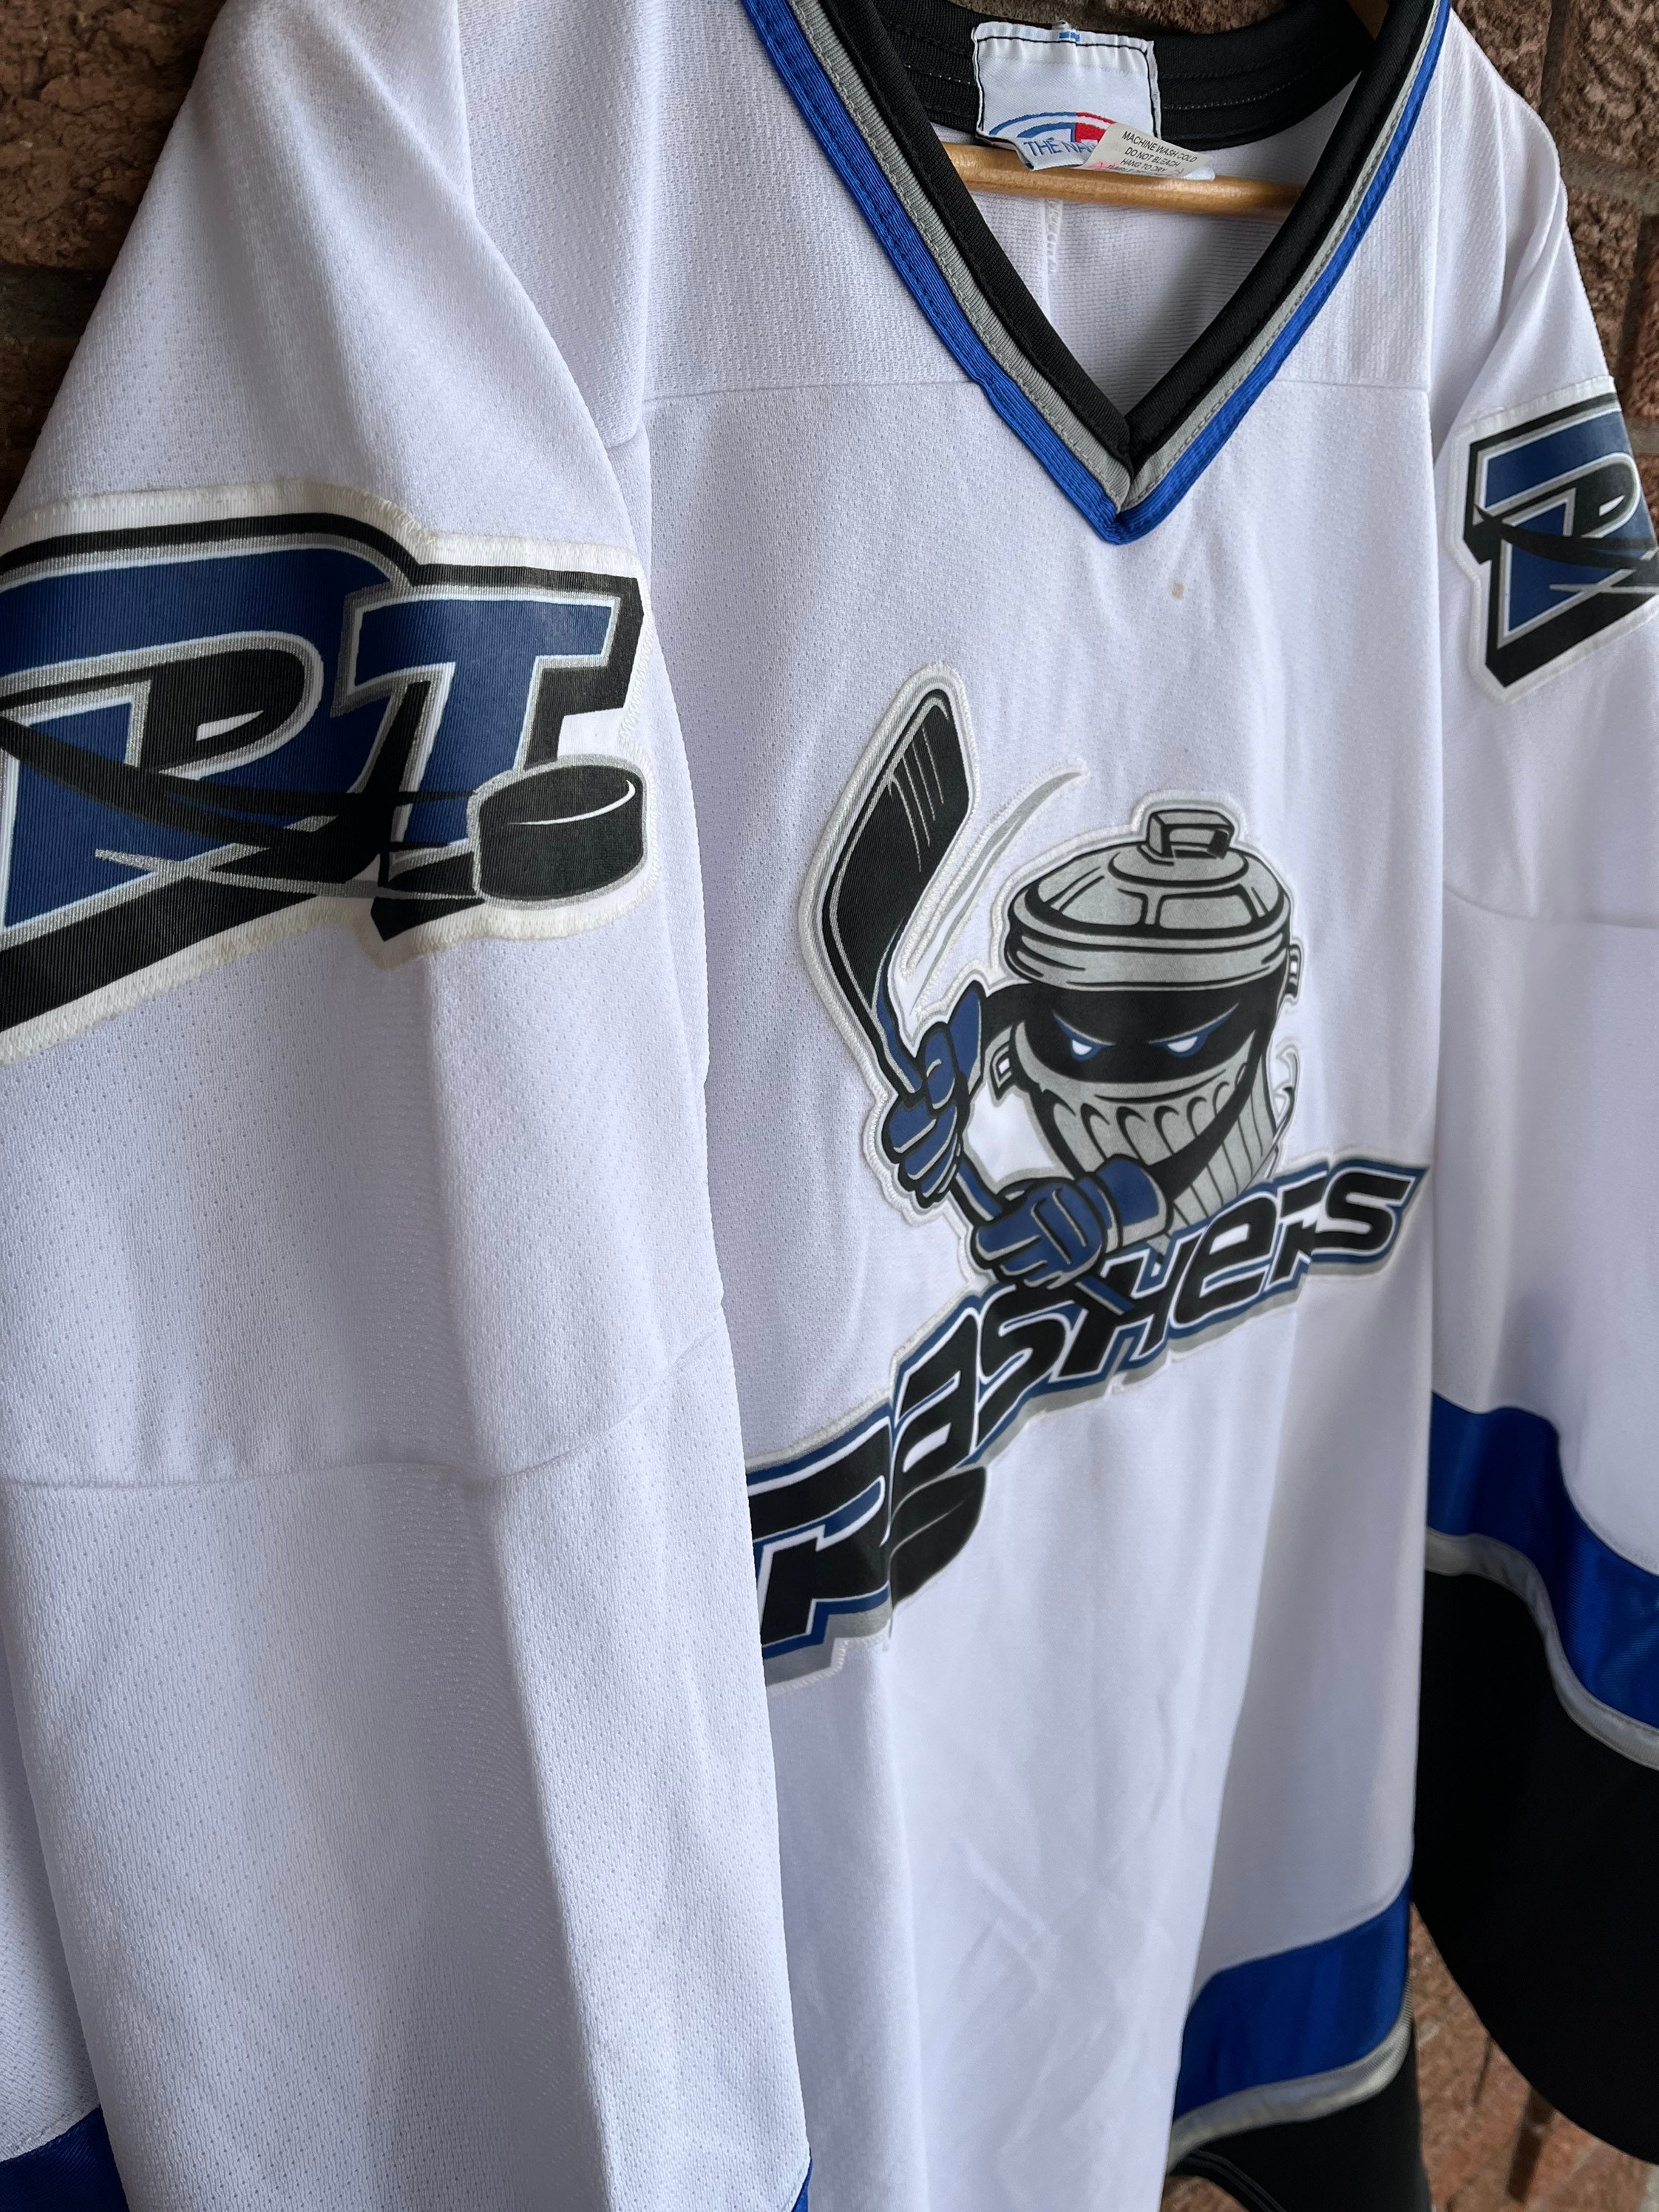 Danbury Trashers Jersey FOR SALE! - PicClick